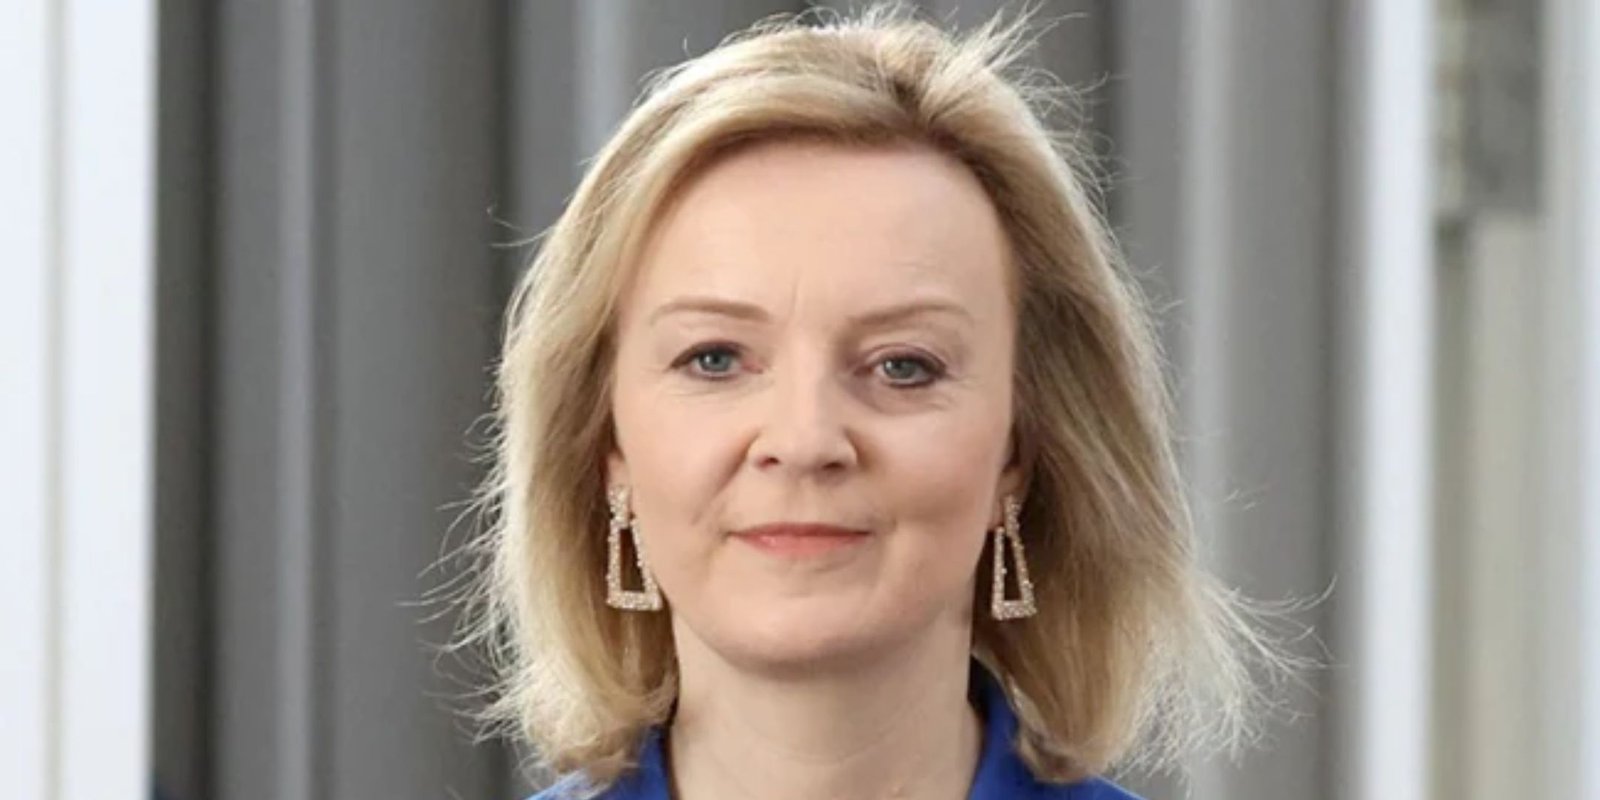 Liz Truss enters the race to become the next prime minister of Britain